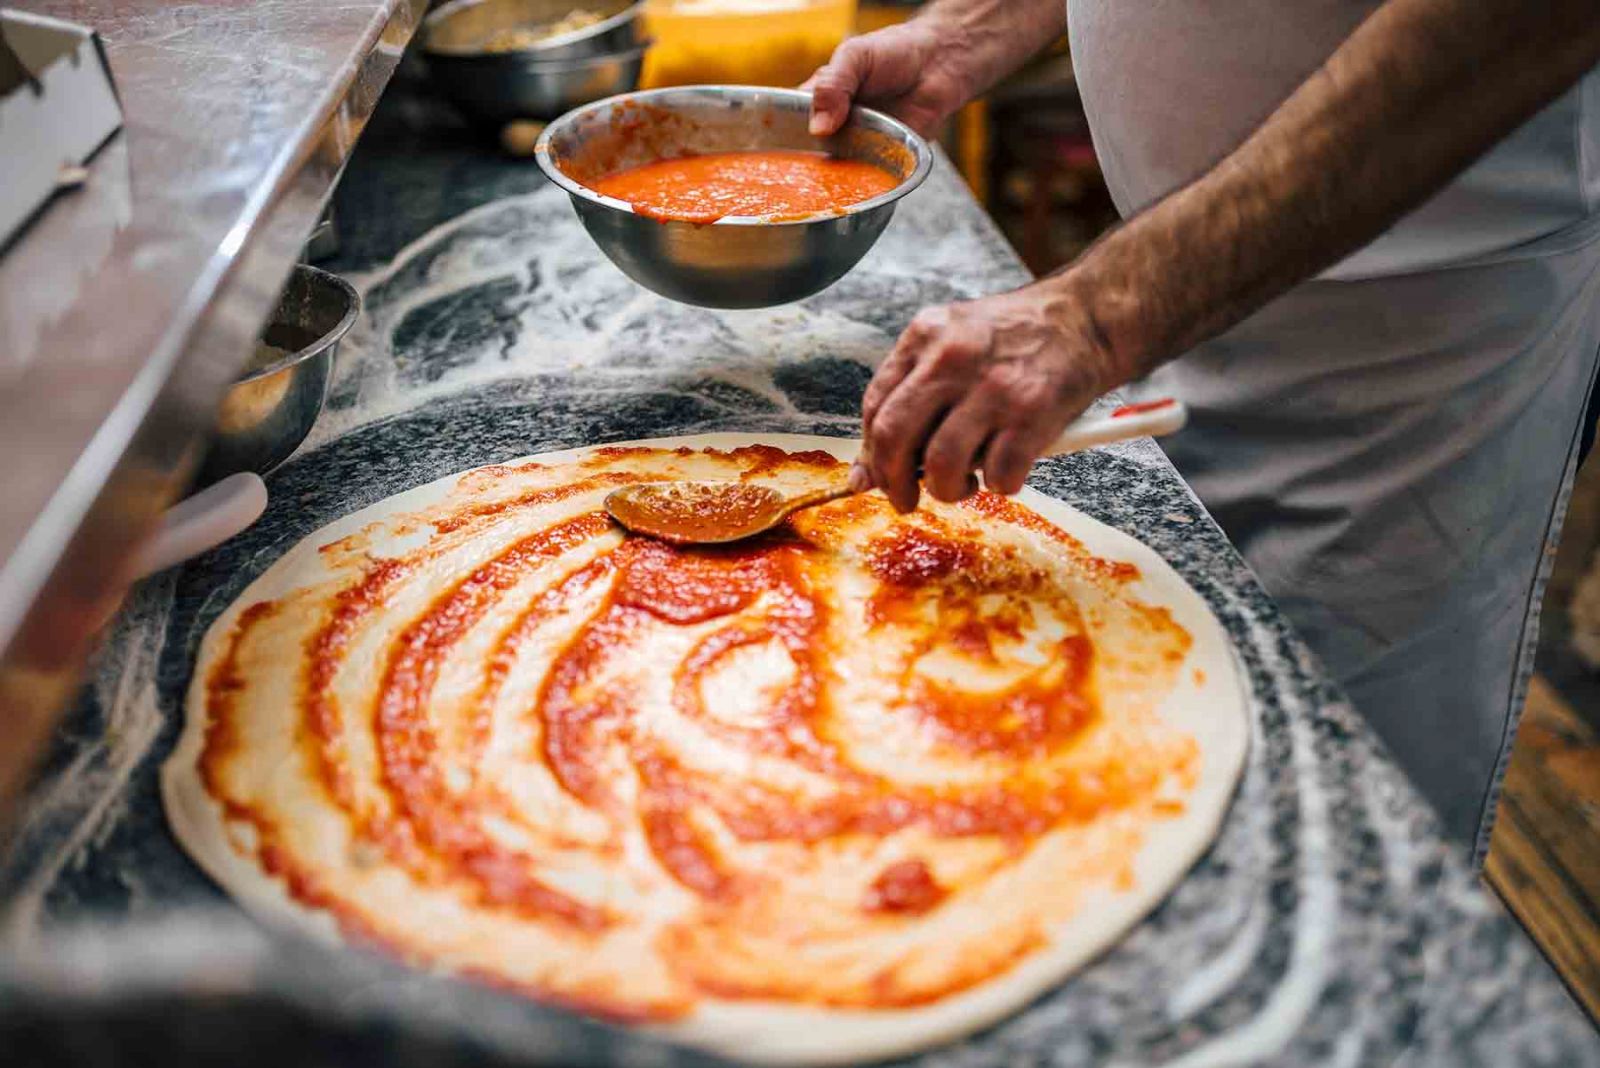 Chef spreading sauce on a pizza crust